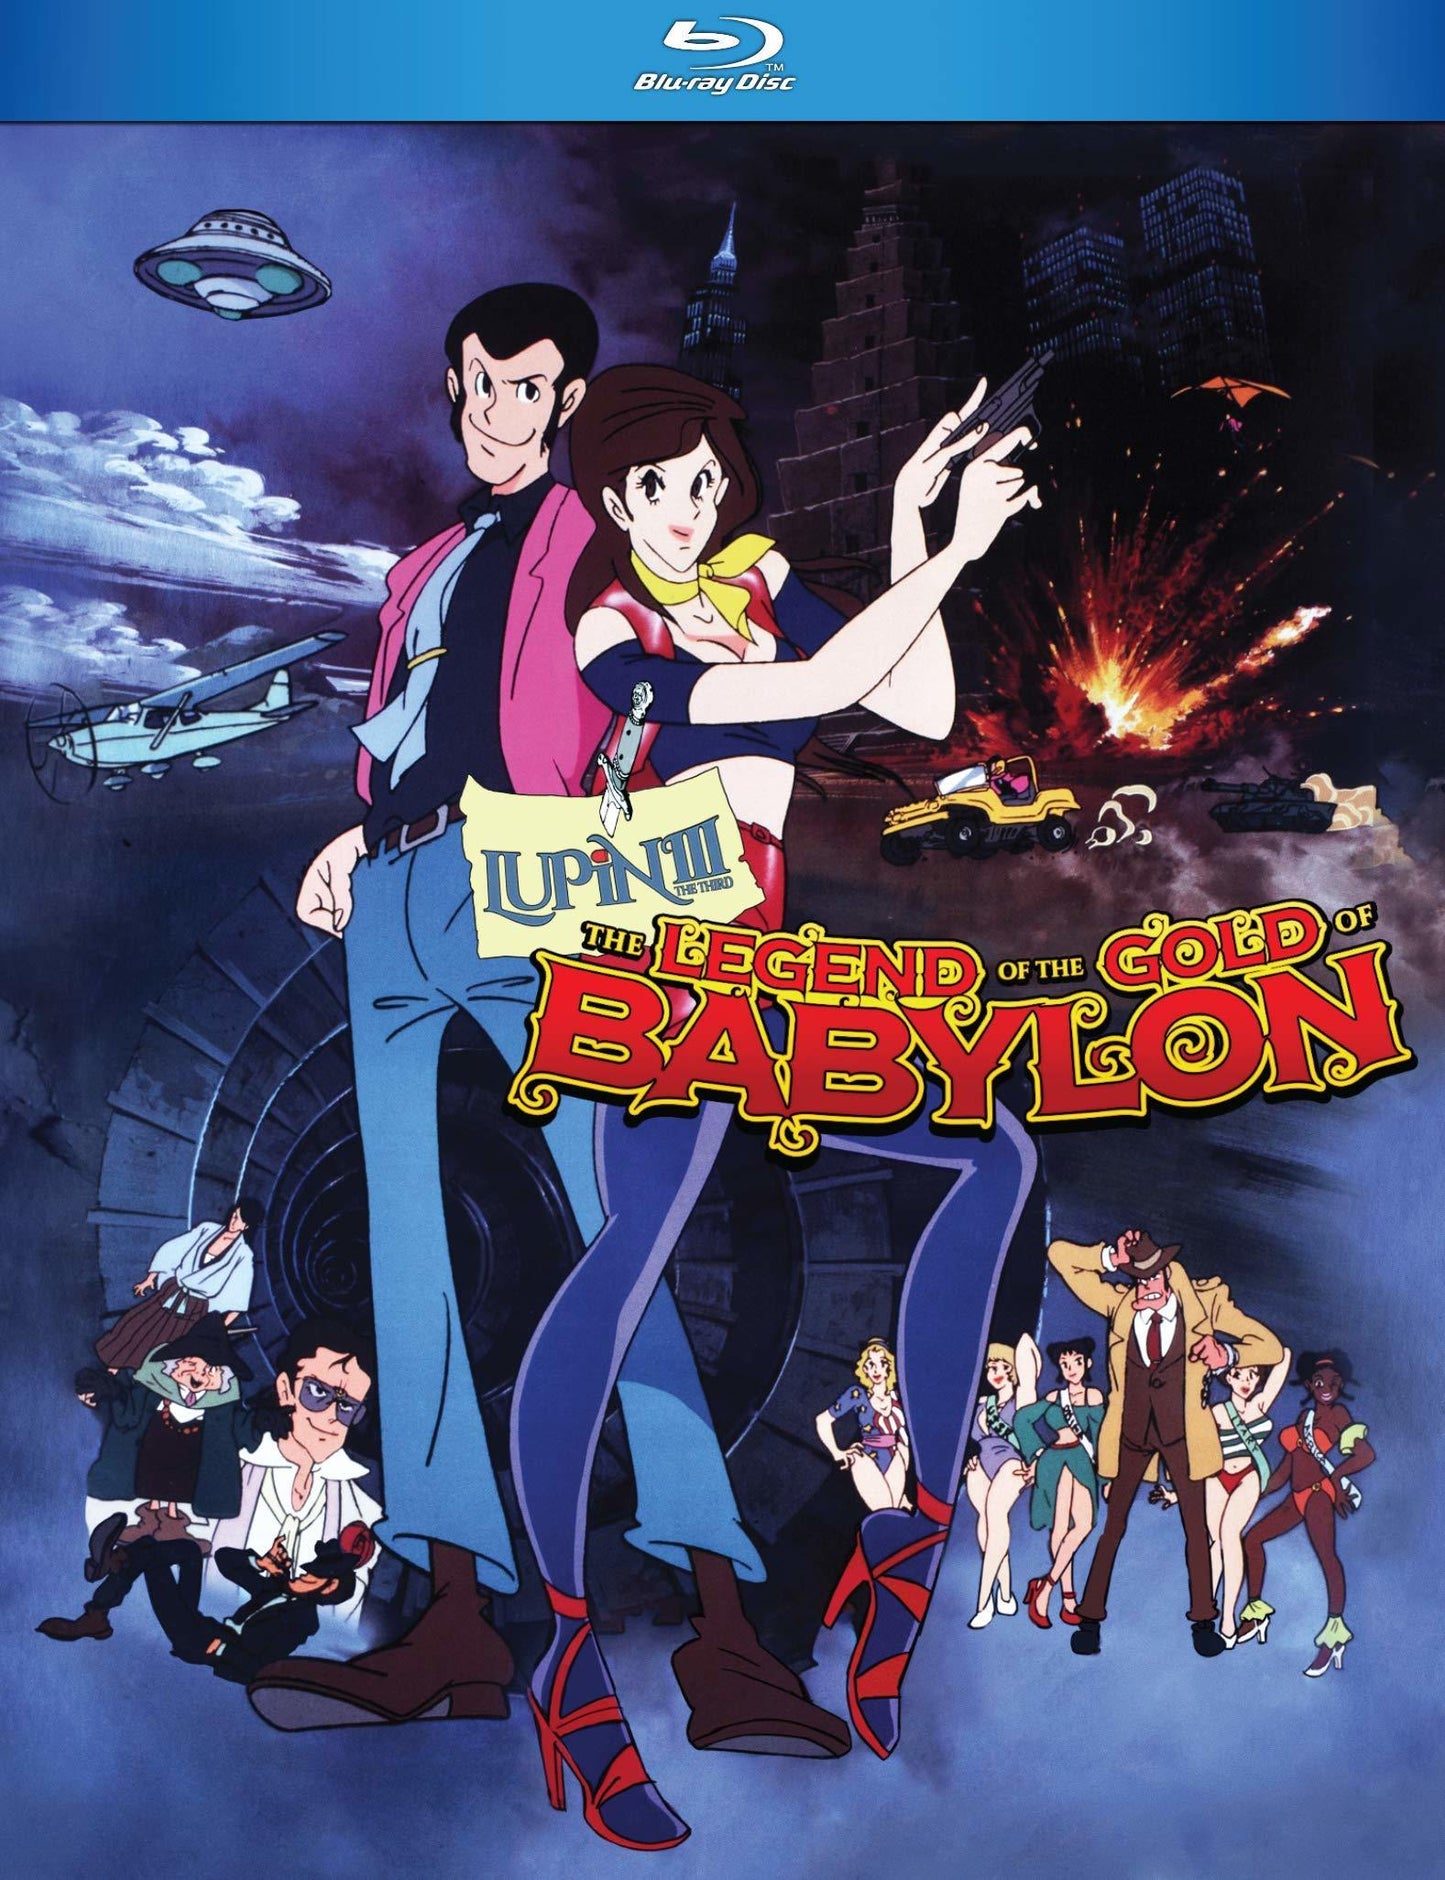 Lupin III The Third: The Legend of the Gold of Babylon